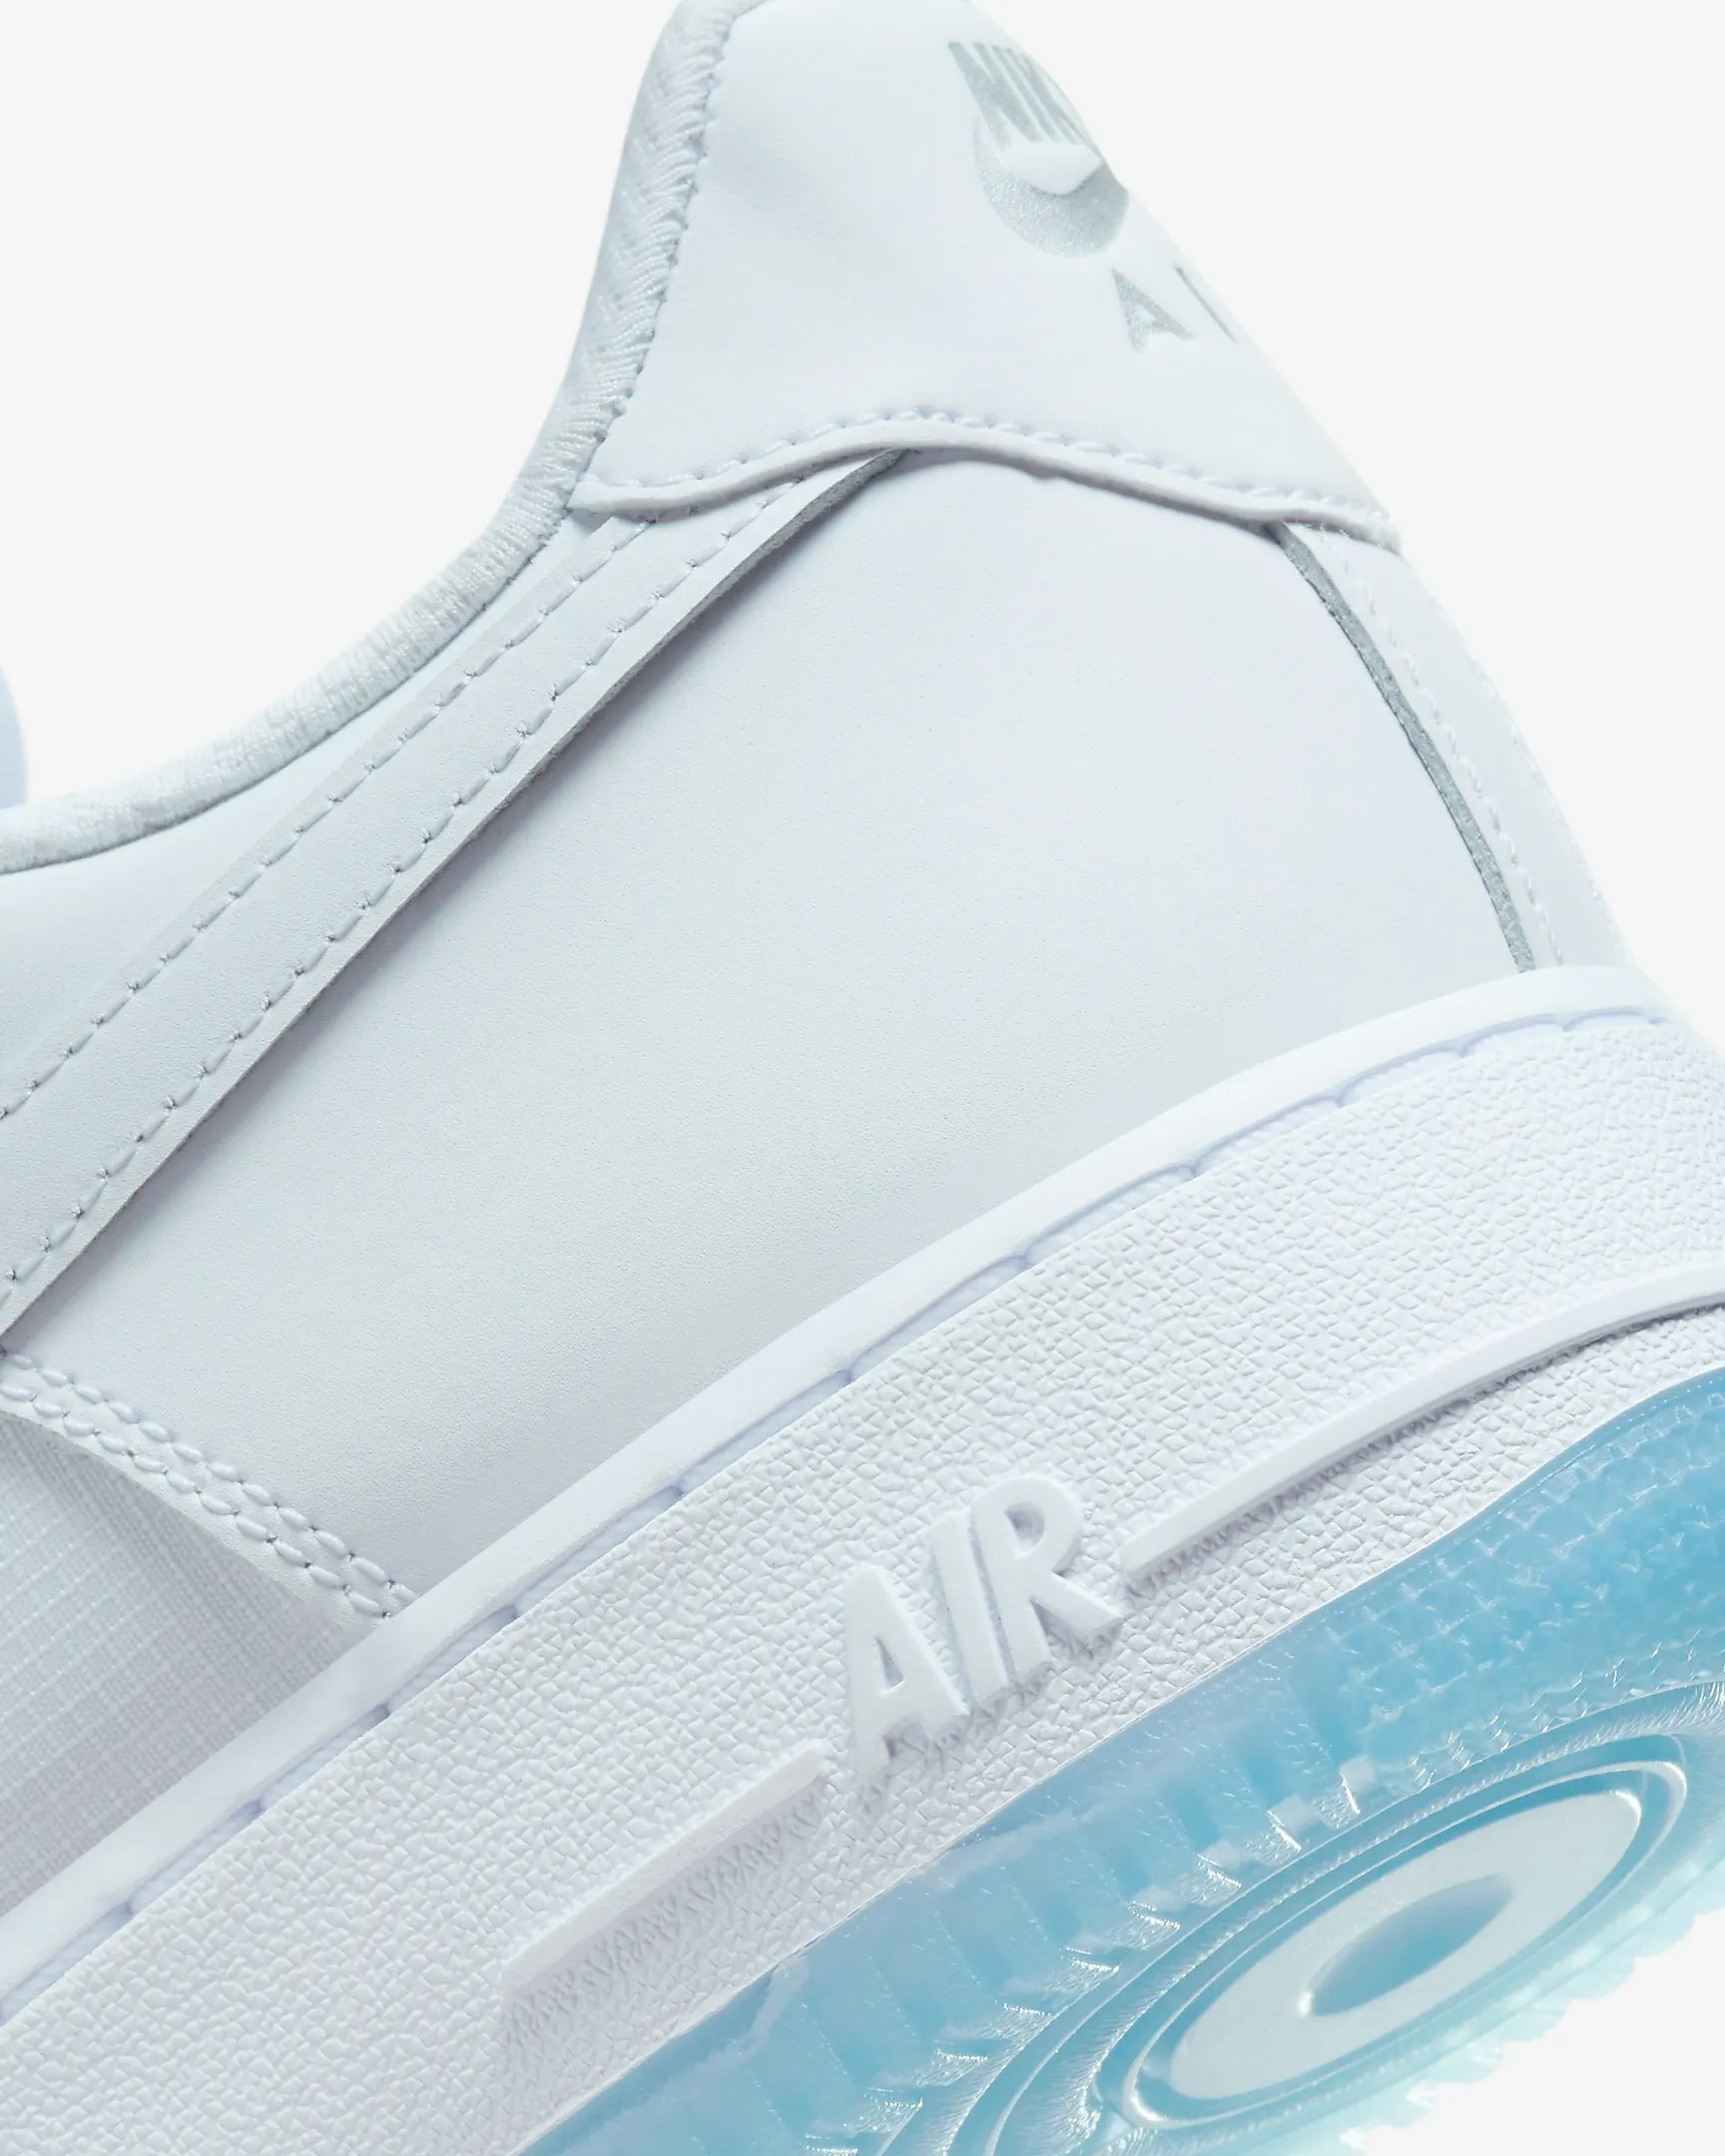 Nike Air Force 1 Low "Icy Blue"